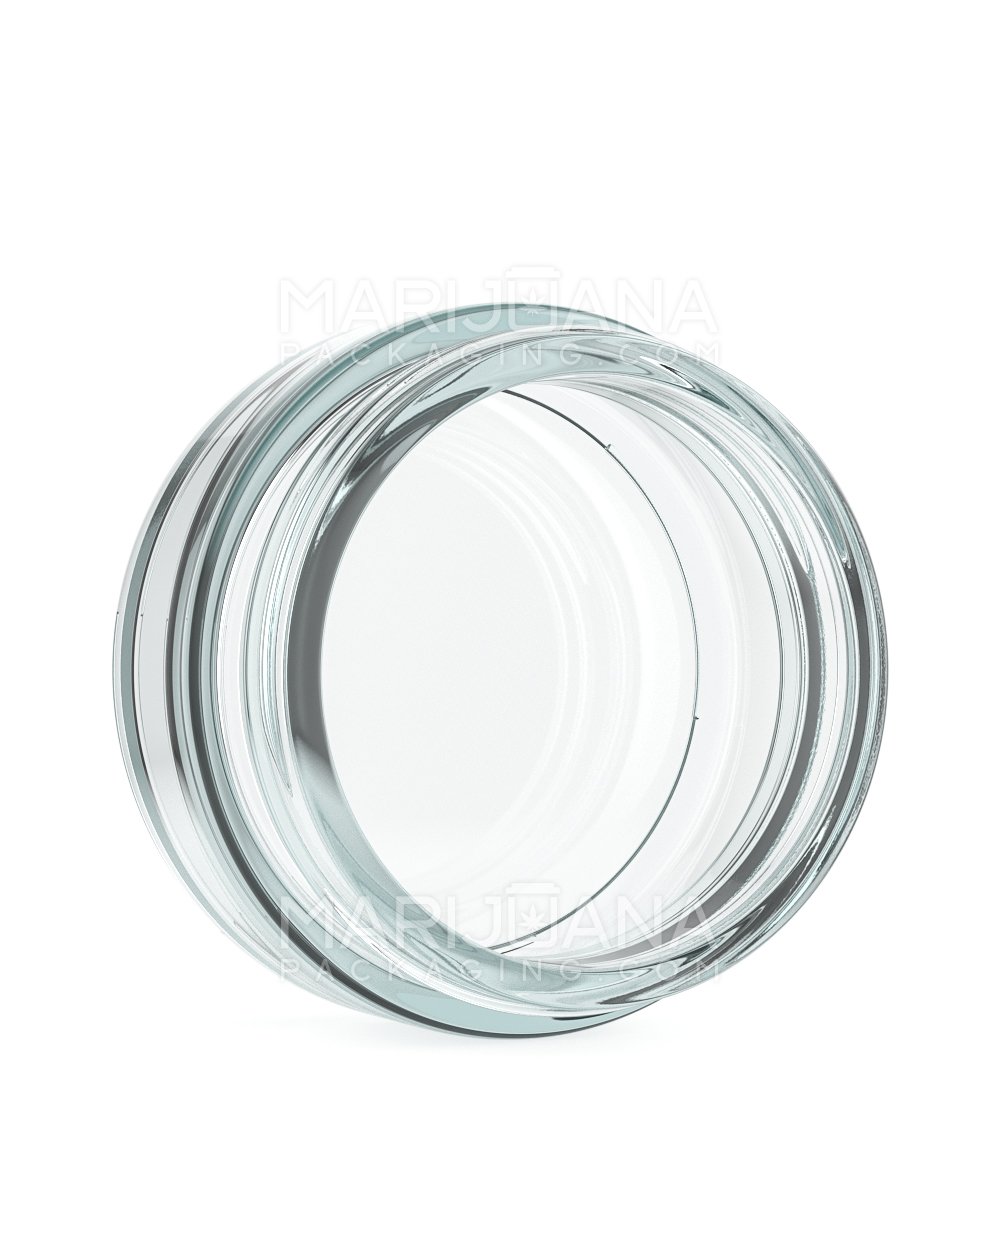 Straight Sided Clear Glass Jars | 63mm - 1.7oz - 96 Count - 3